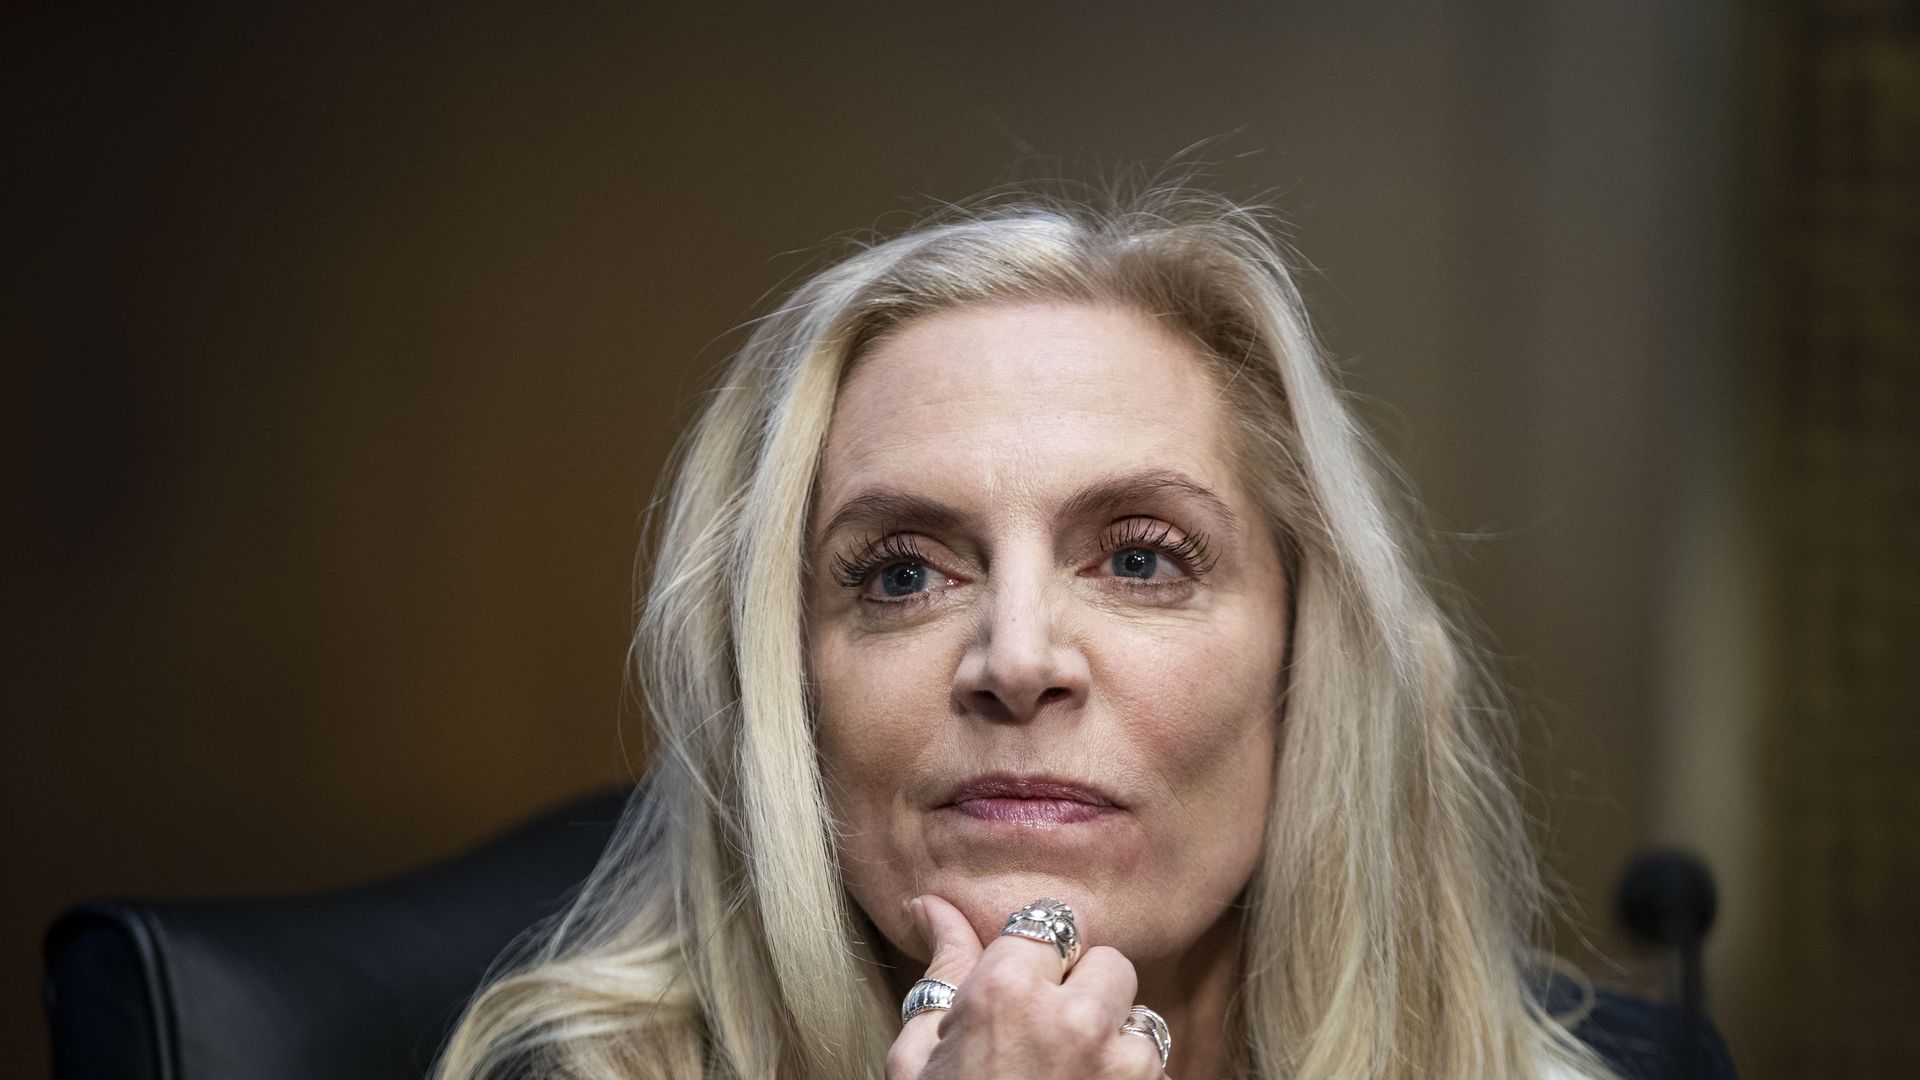 Lael Brainard, governor of the U.S. Federal Reserve, listens during a Senate Banking, Housing, and Urban Affairs Committee confirmation hearing in Washington, D.C.,